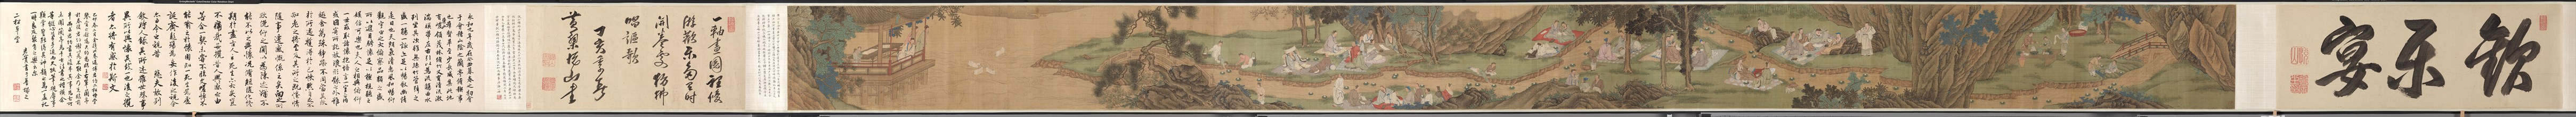 Purification at the Orchid Pavilion, 1671. Fan Yi (Chinese, c. 1615-before 1688). Handscroll, ink